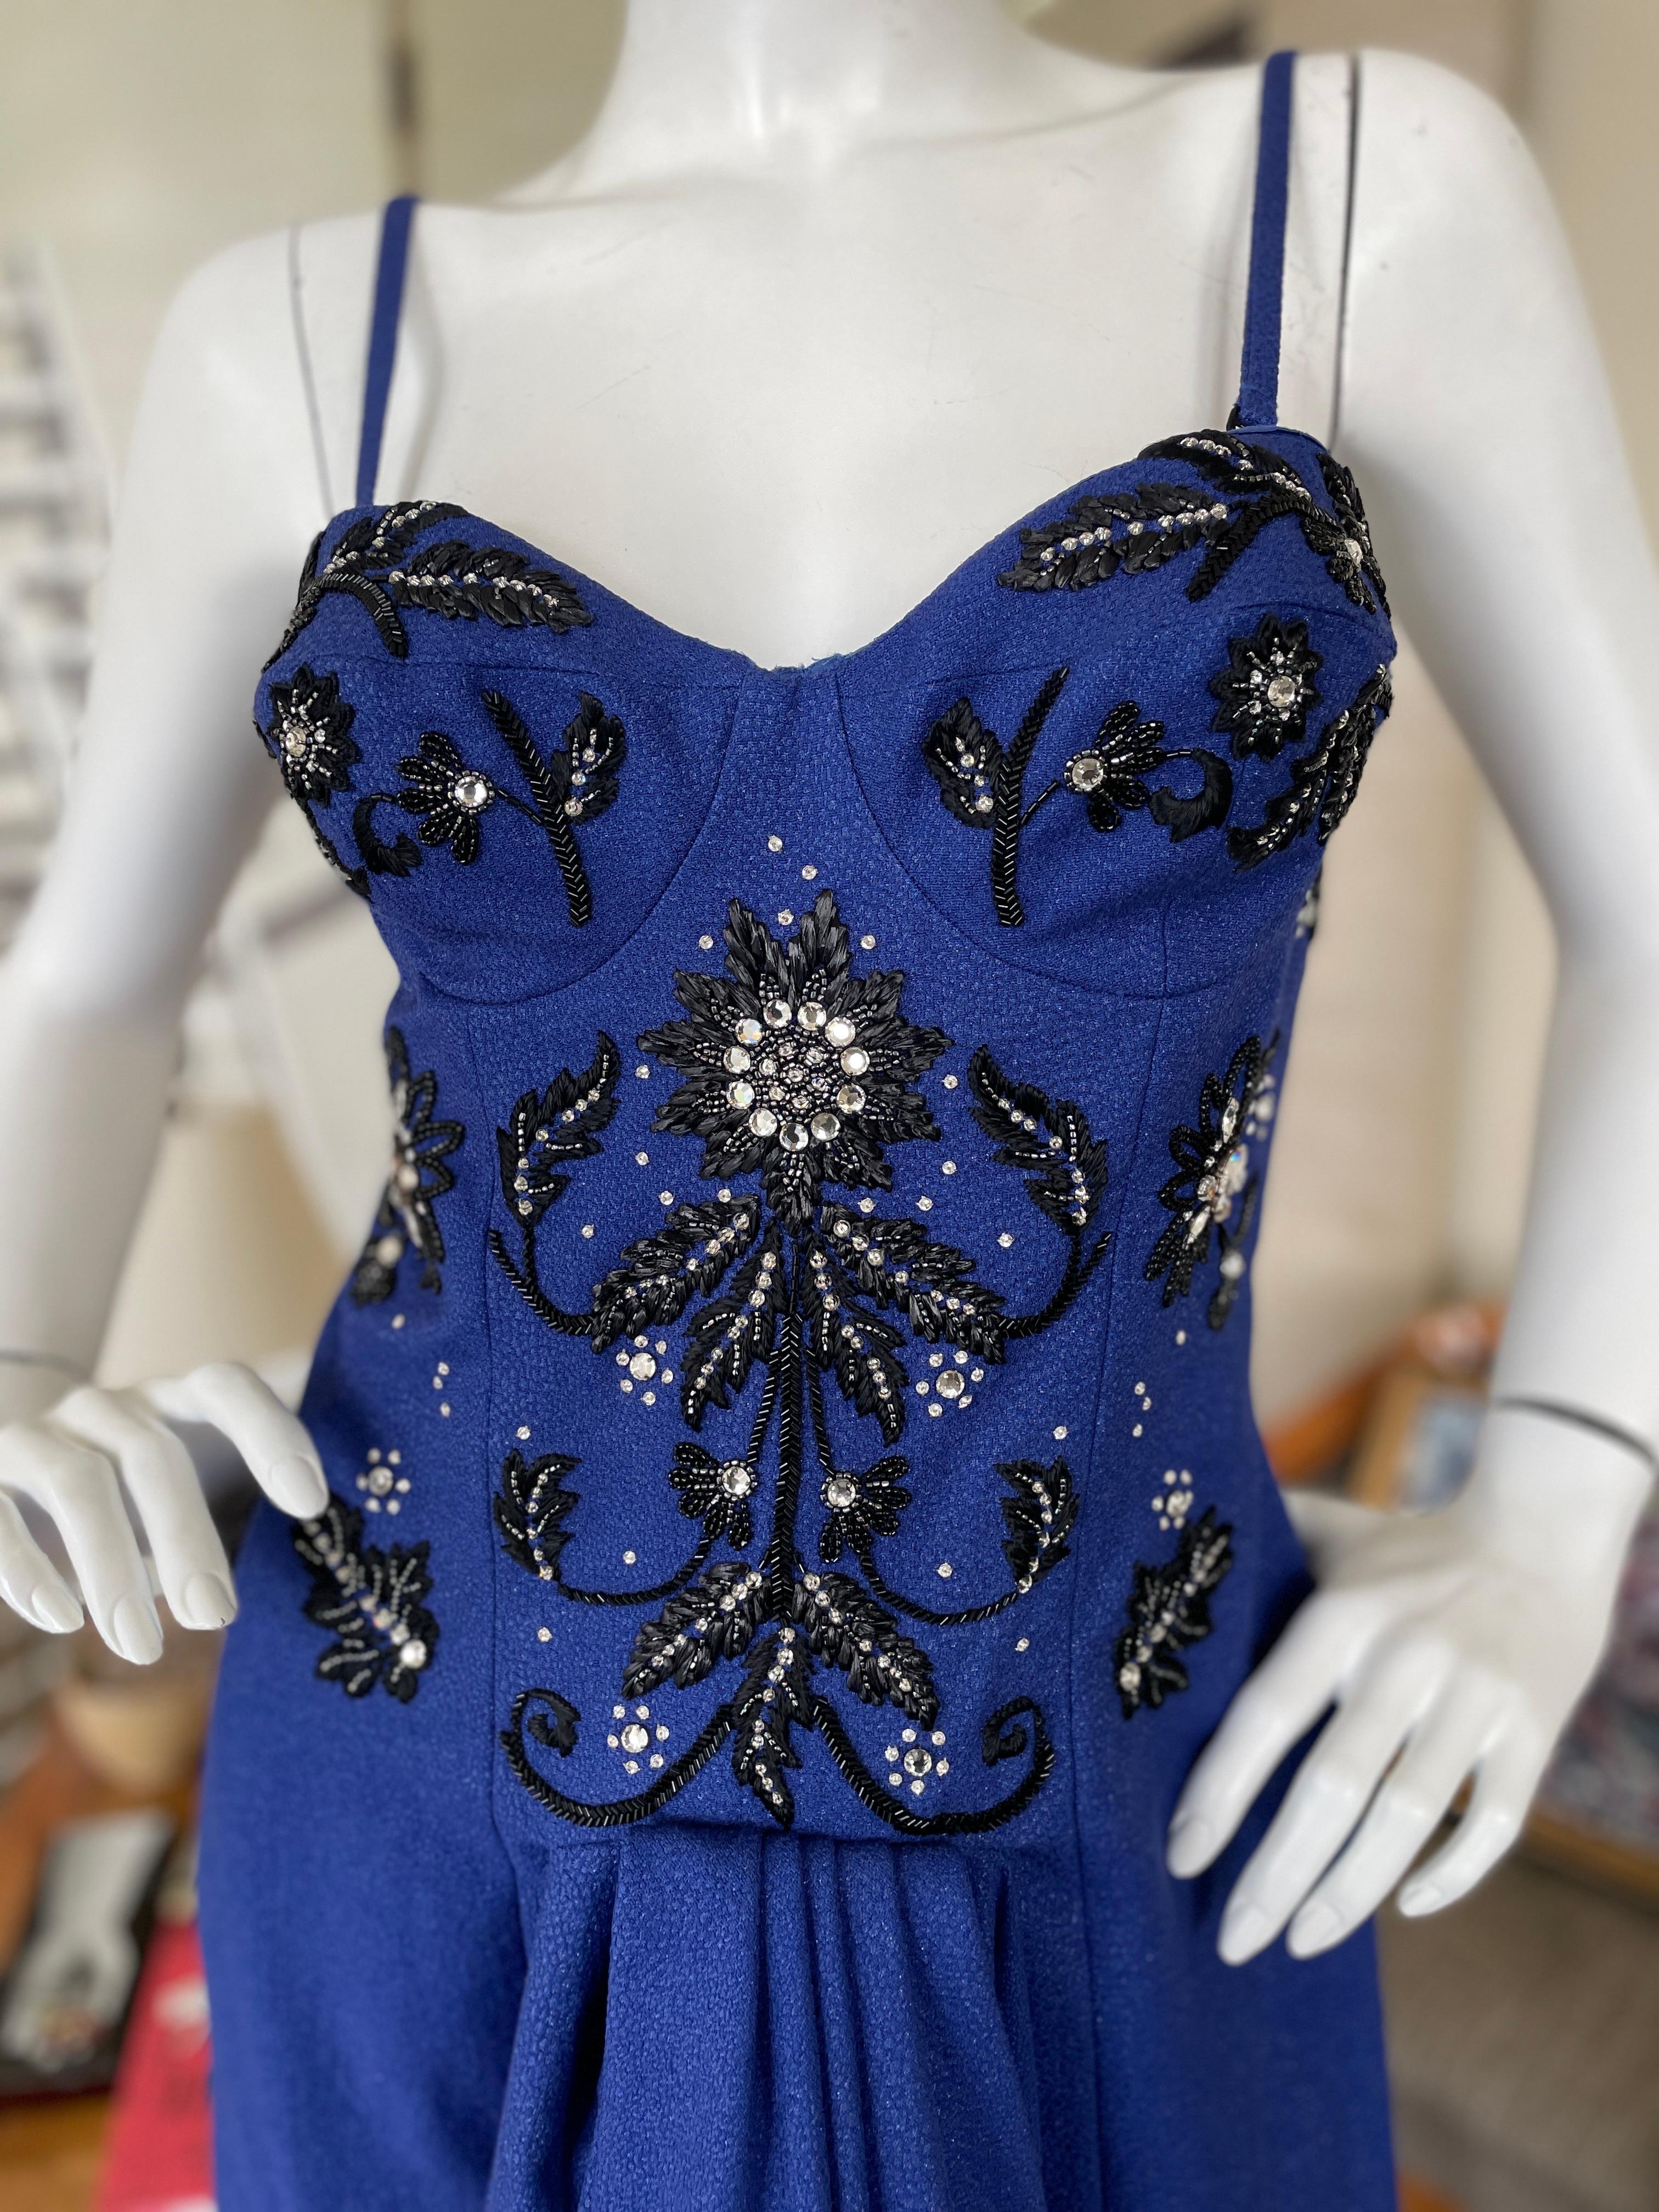 Christian Dior by John Galliano Fall 2007 Blue Dress with Crystal Details For Sale 4